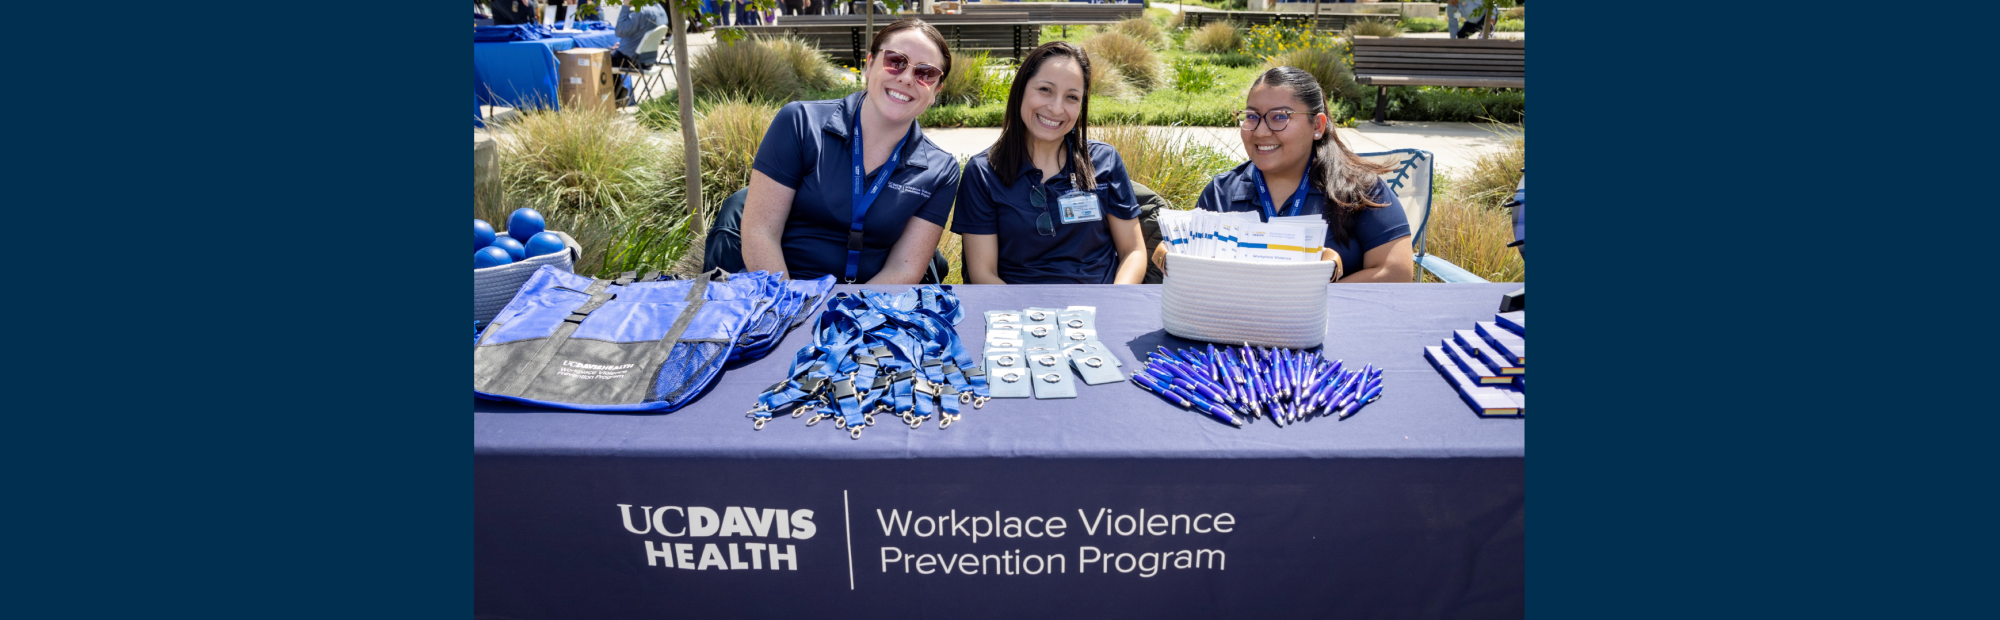 three employees sitting at workplace violence prevention booth